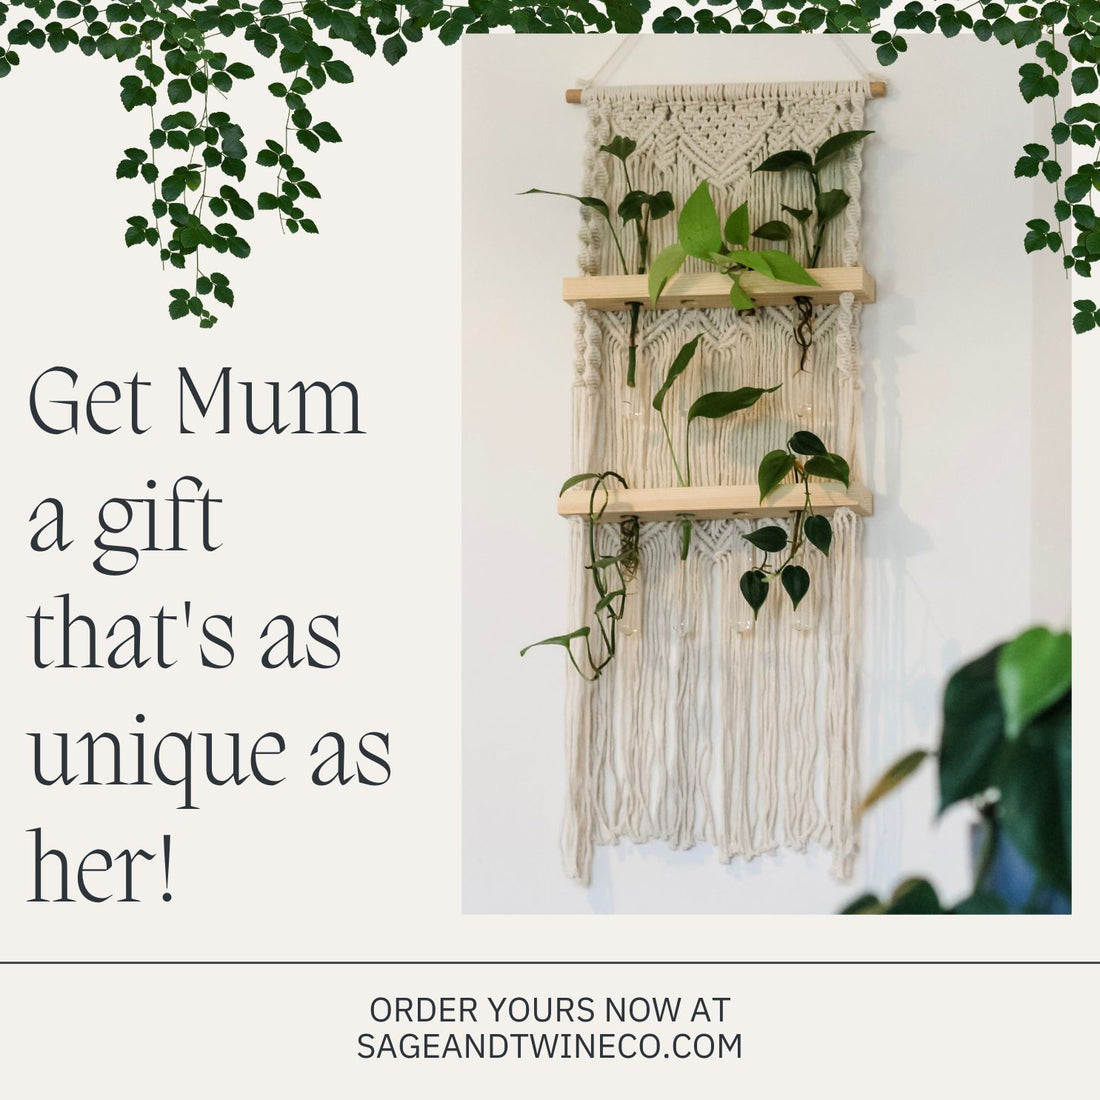 Get Mum a gift as unique as her, the Ivy Propagation station from sage and twine is i the perfect plant lover gift.